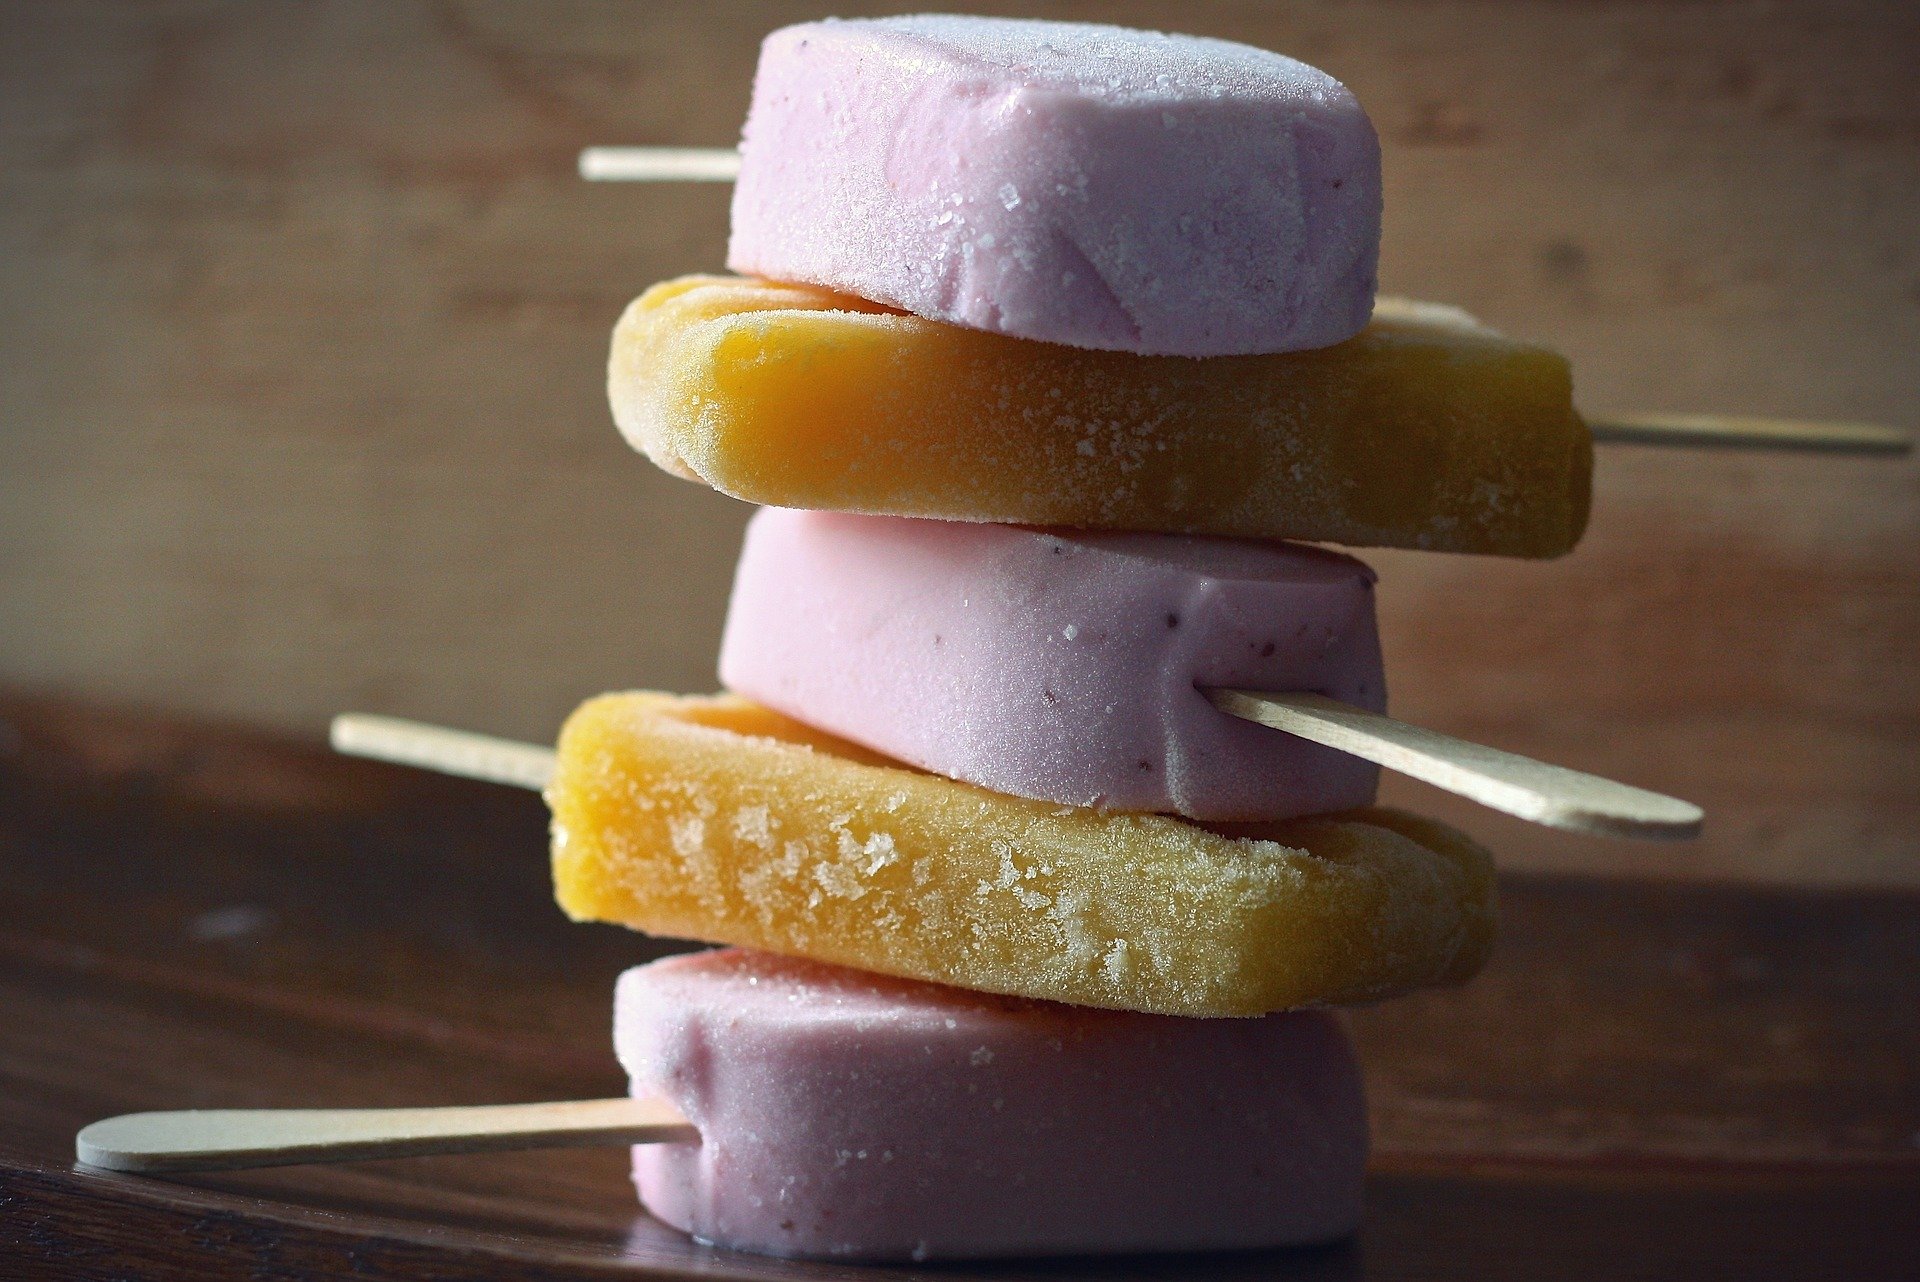 Paletas, ice pops made with fruit.